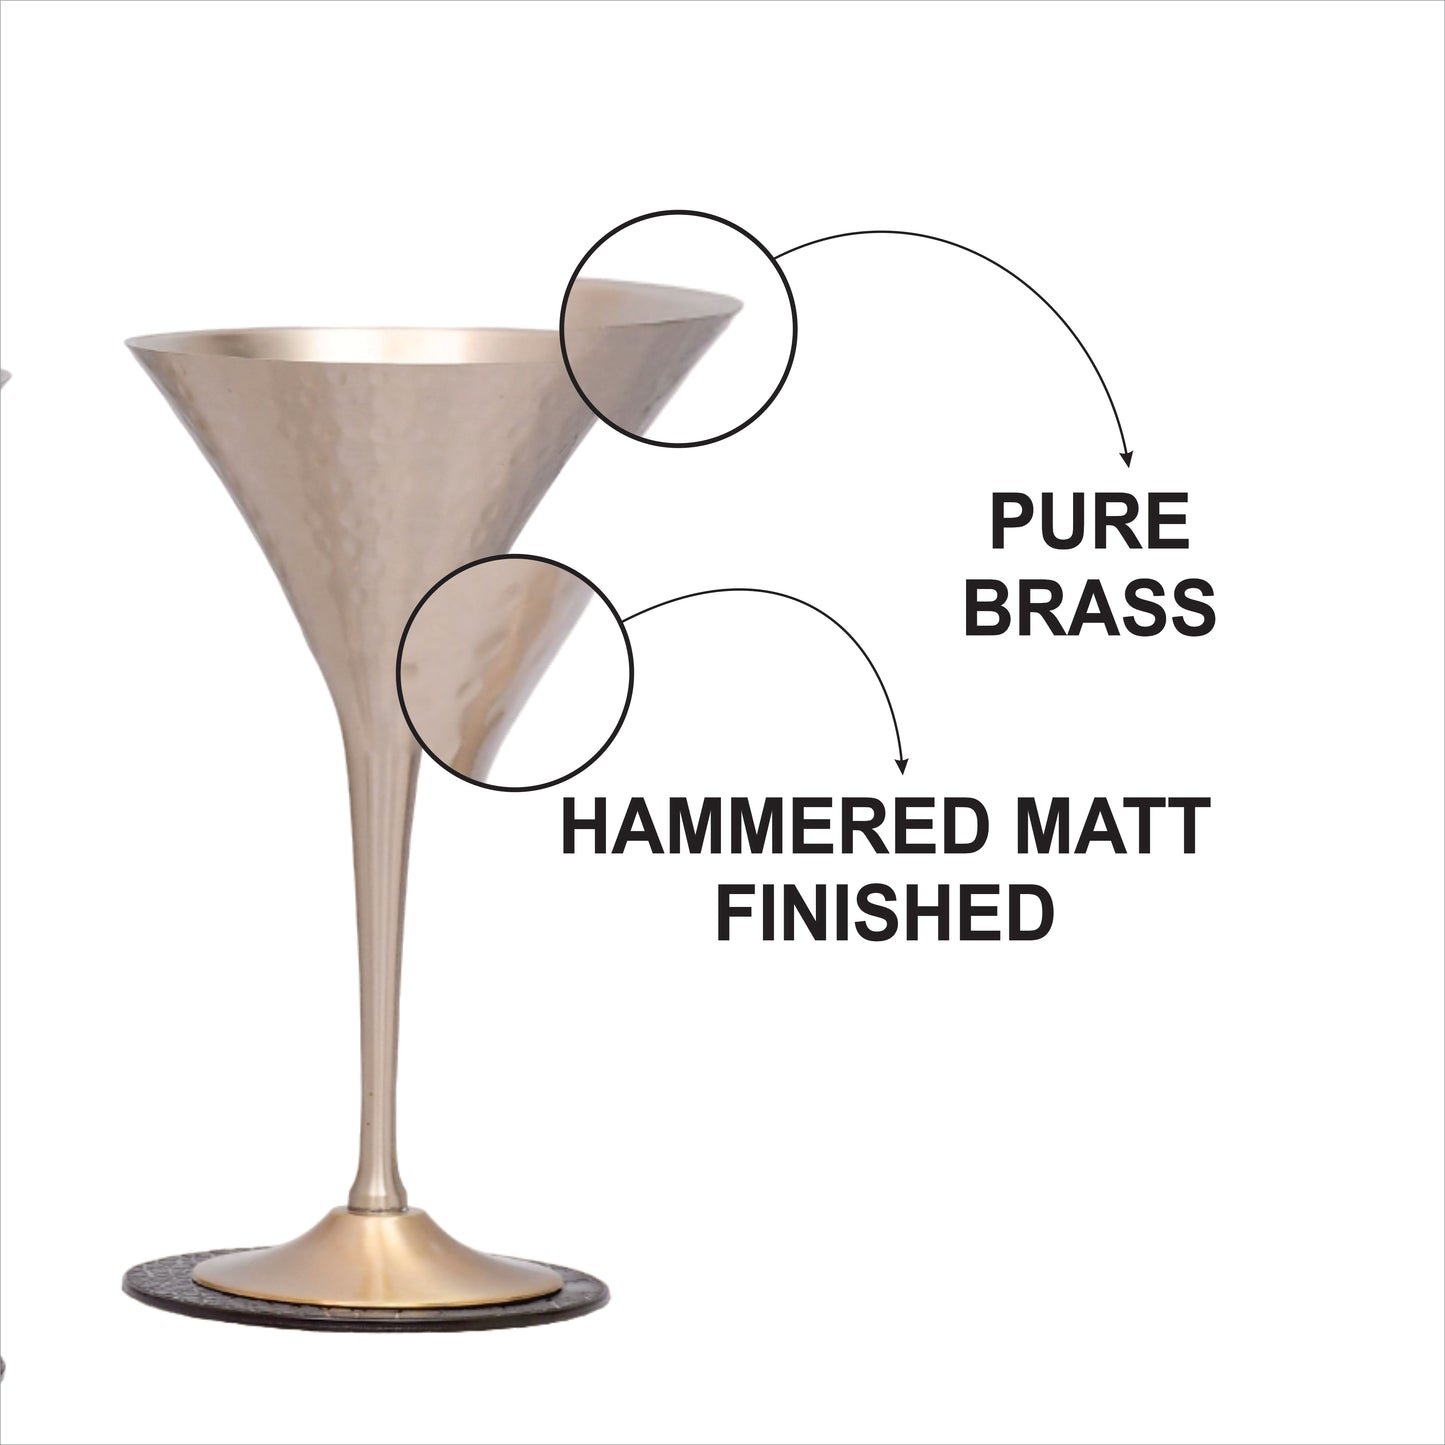 Beautifully Designed Hammered Martini Conical Brass Matt Finished Goblet Glasses | Set of 2